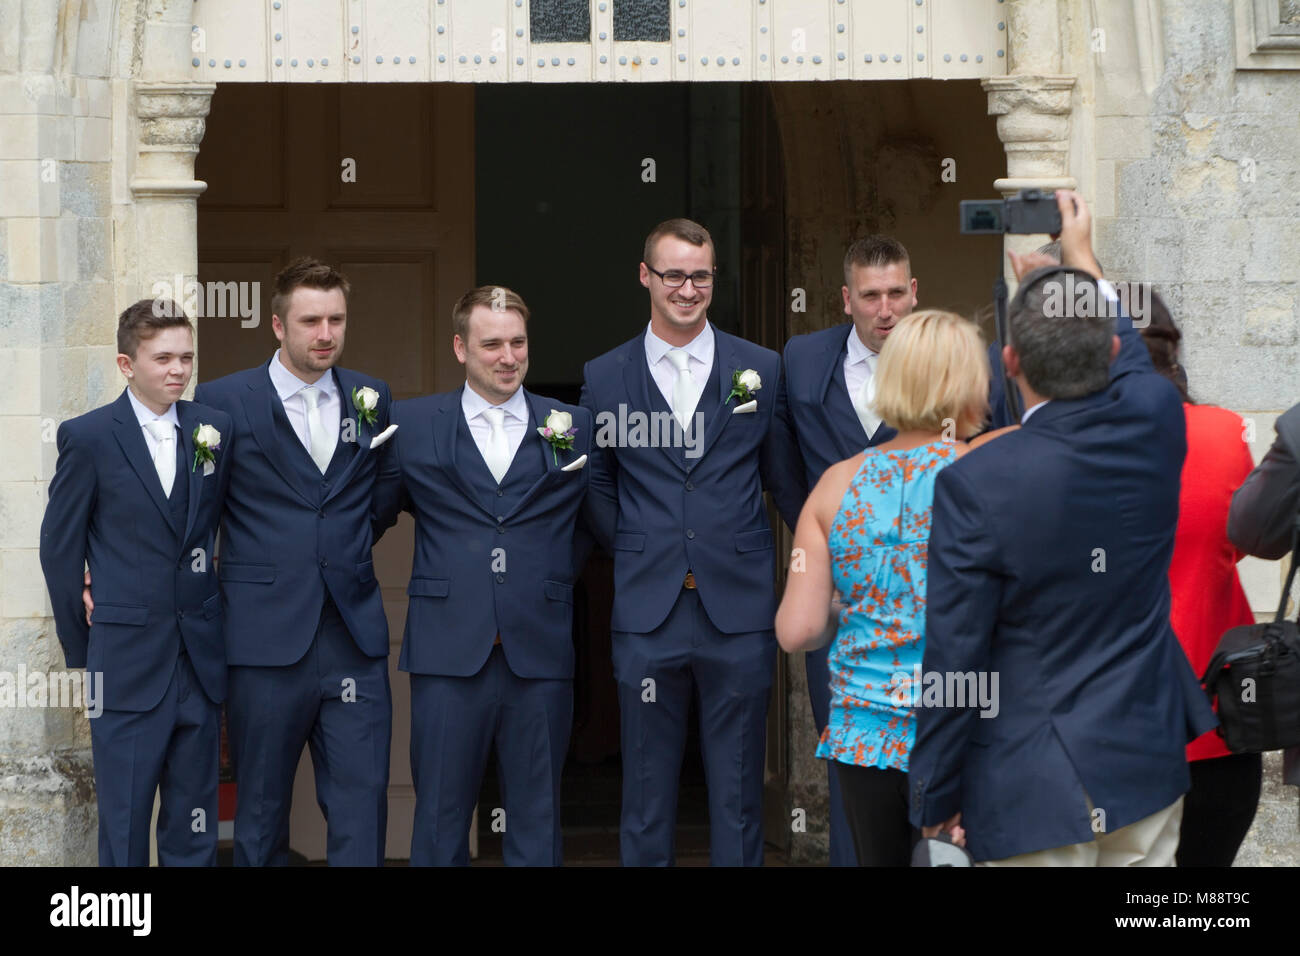 The groom's party wearing matching blue suits Stock Photo